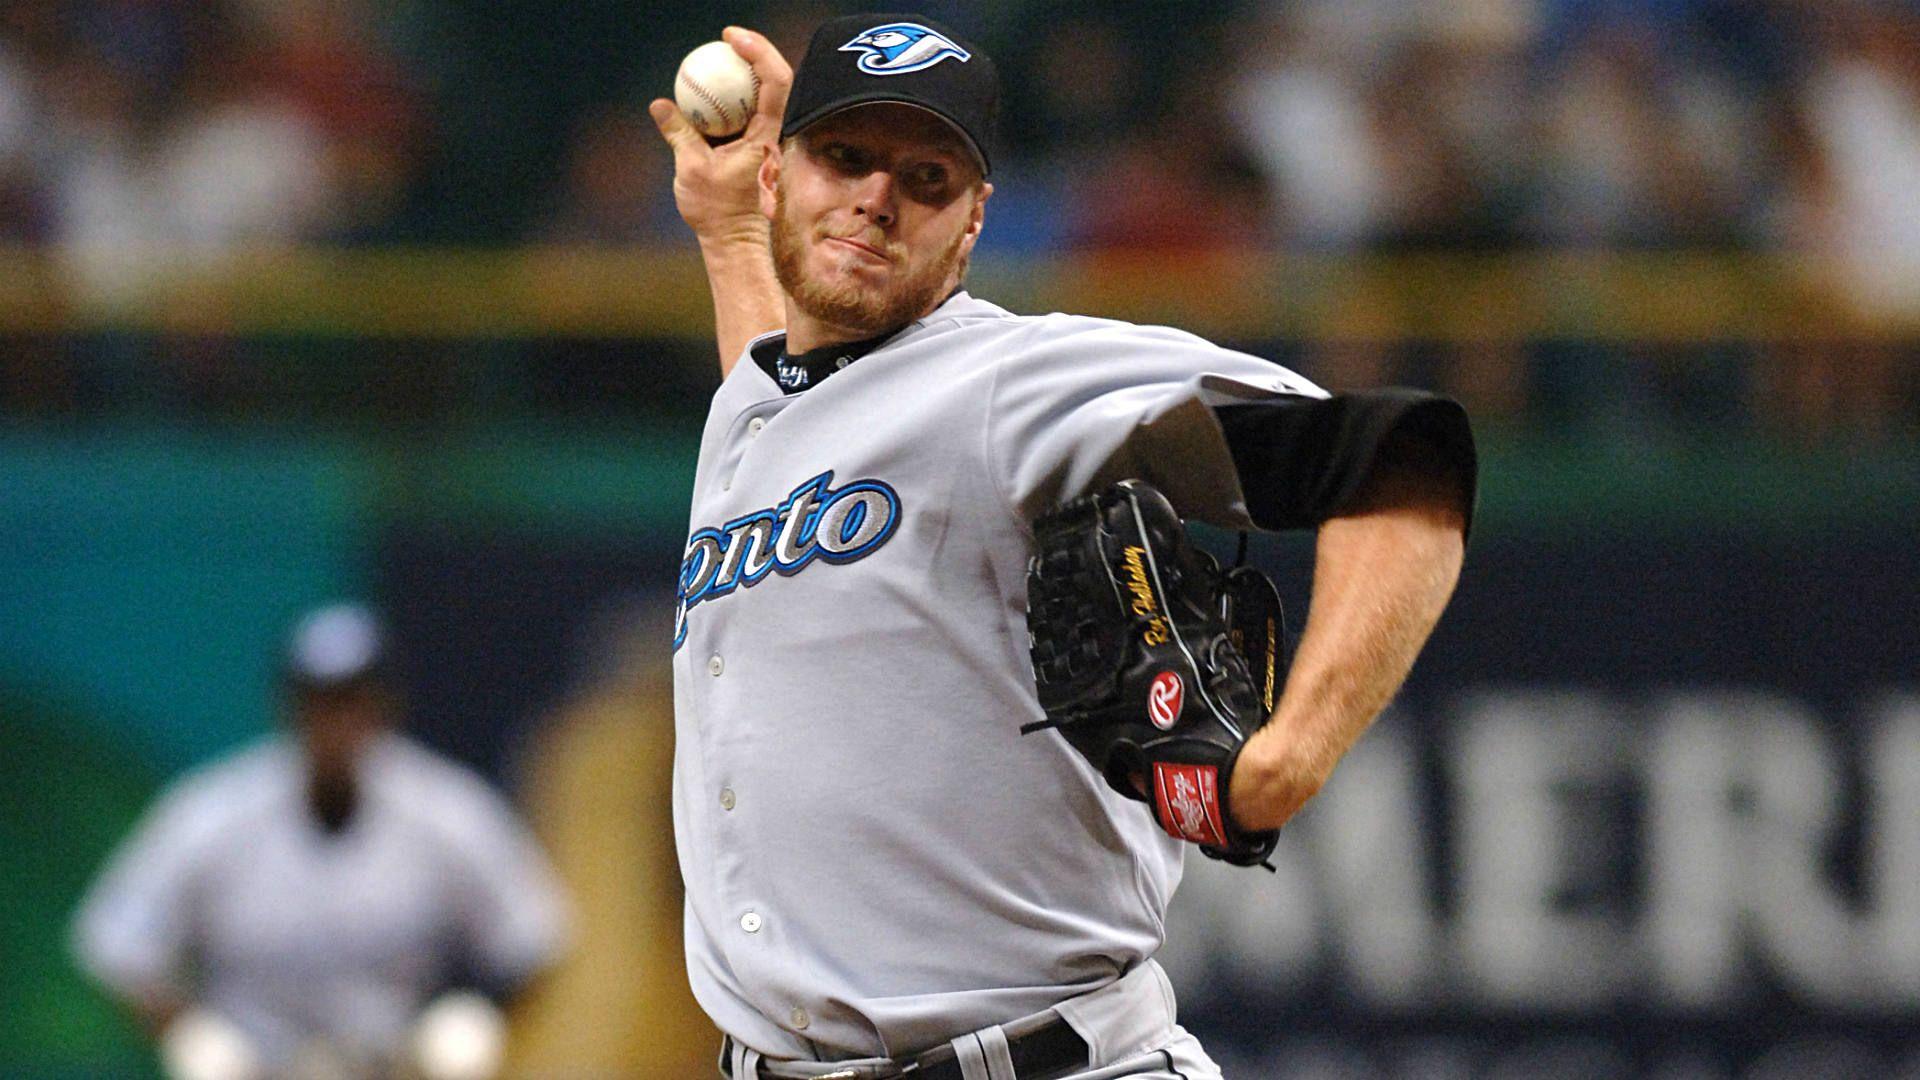 Canadian Baseball Hall of Fame: How Roy Halladay perfected his